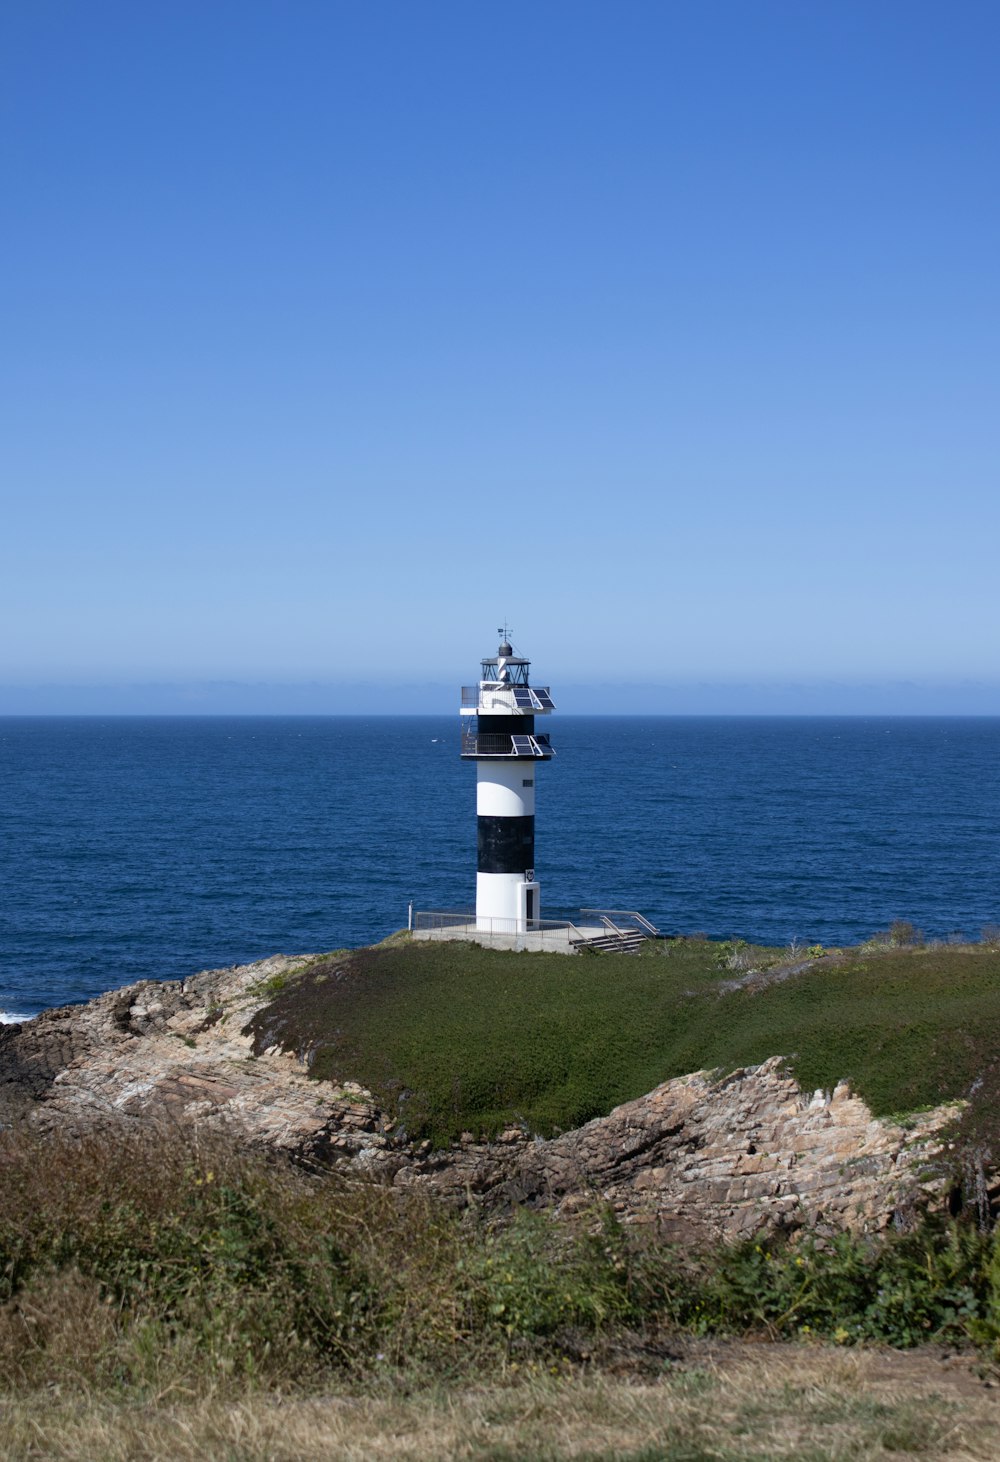 white and black lighthouse on green grass field near blue sea under blue sky during daytime